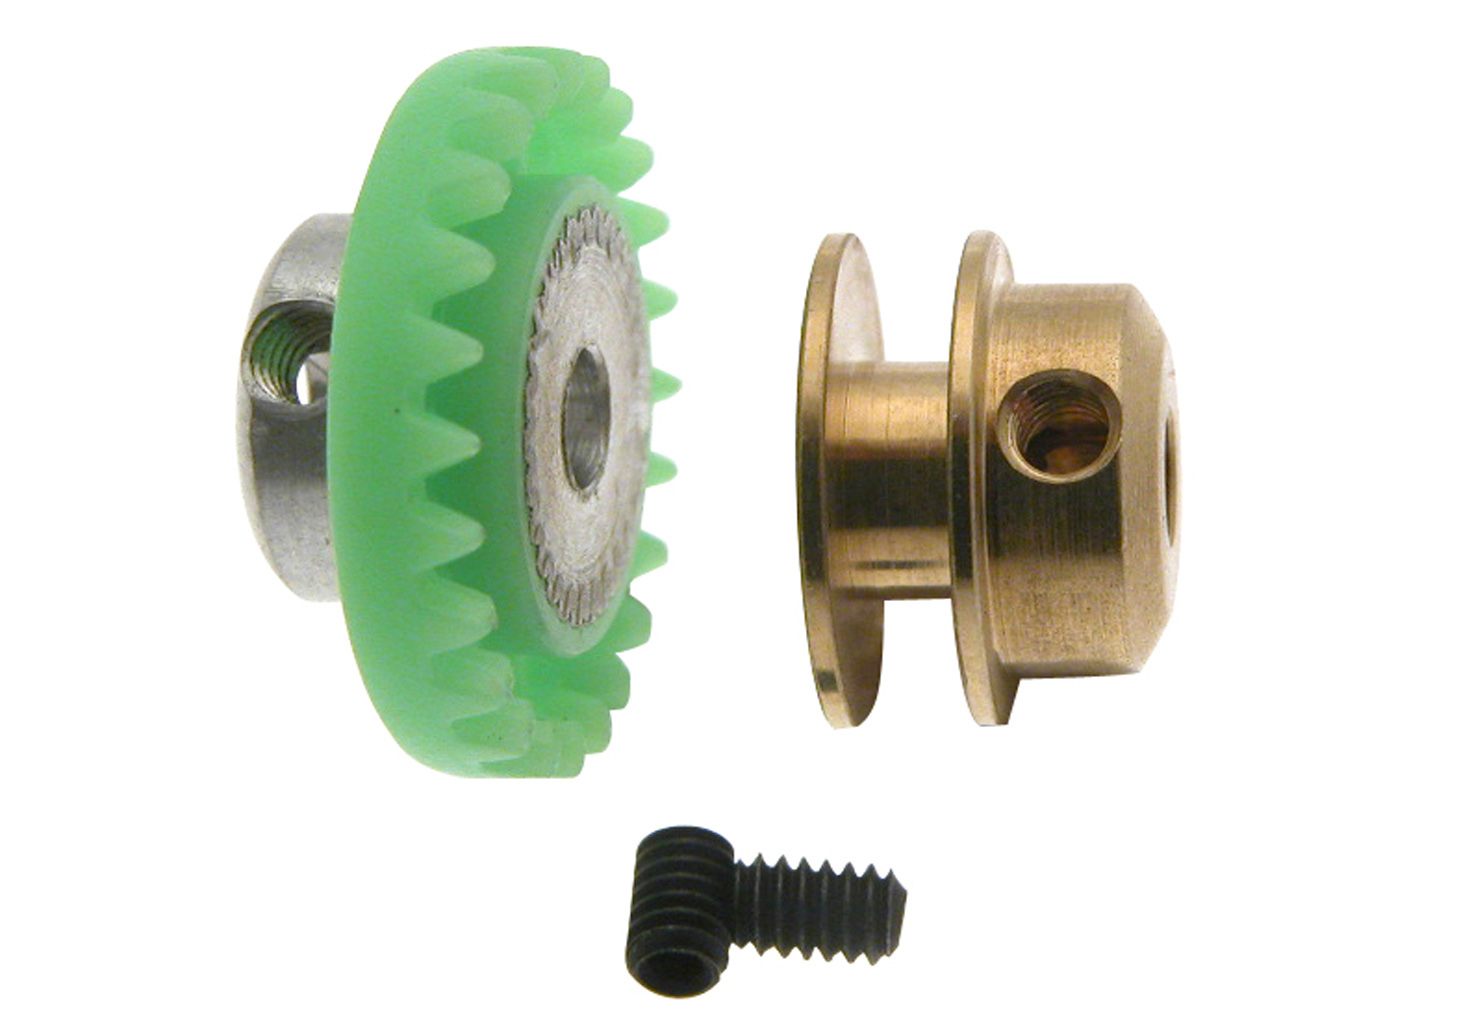 SC-1110 Nylon crown Gear 24t. M50 with M2 screw for 3/32" axle